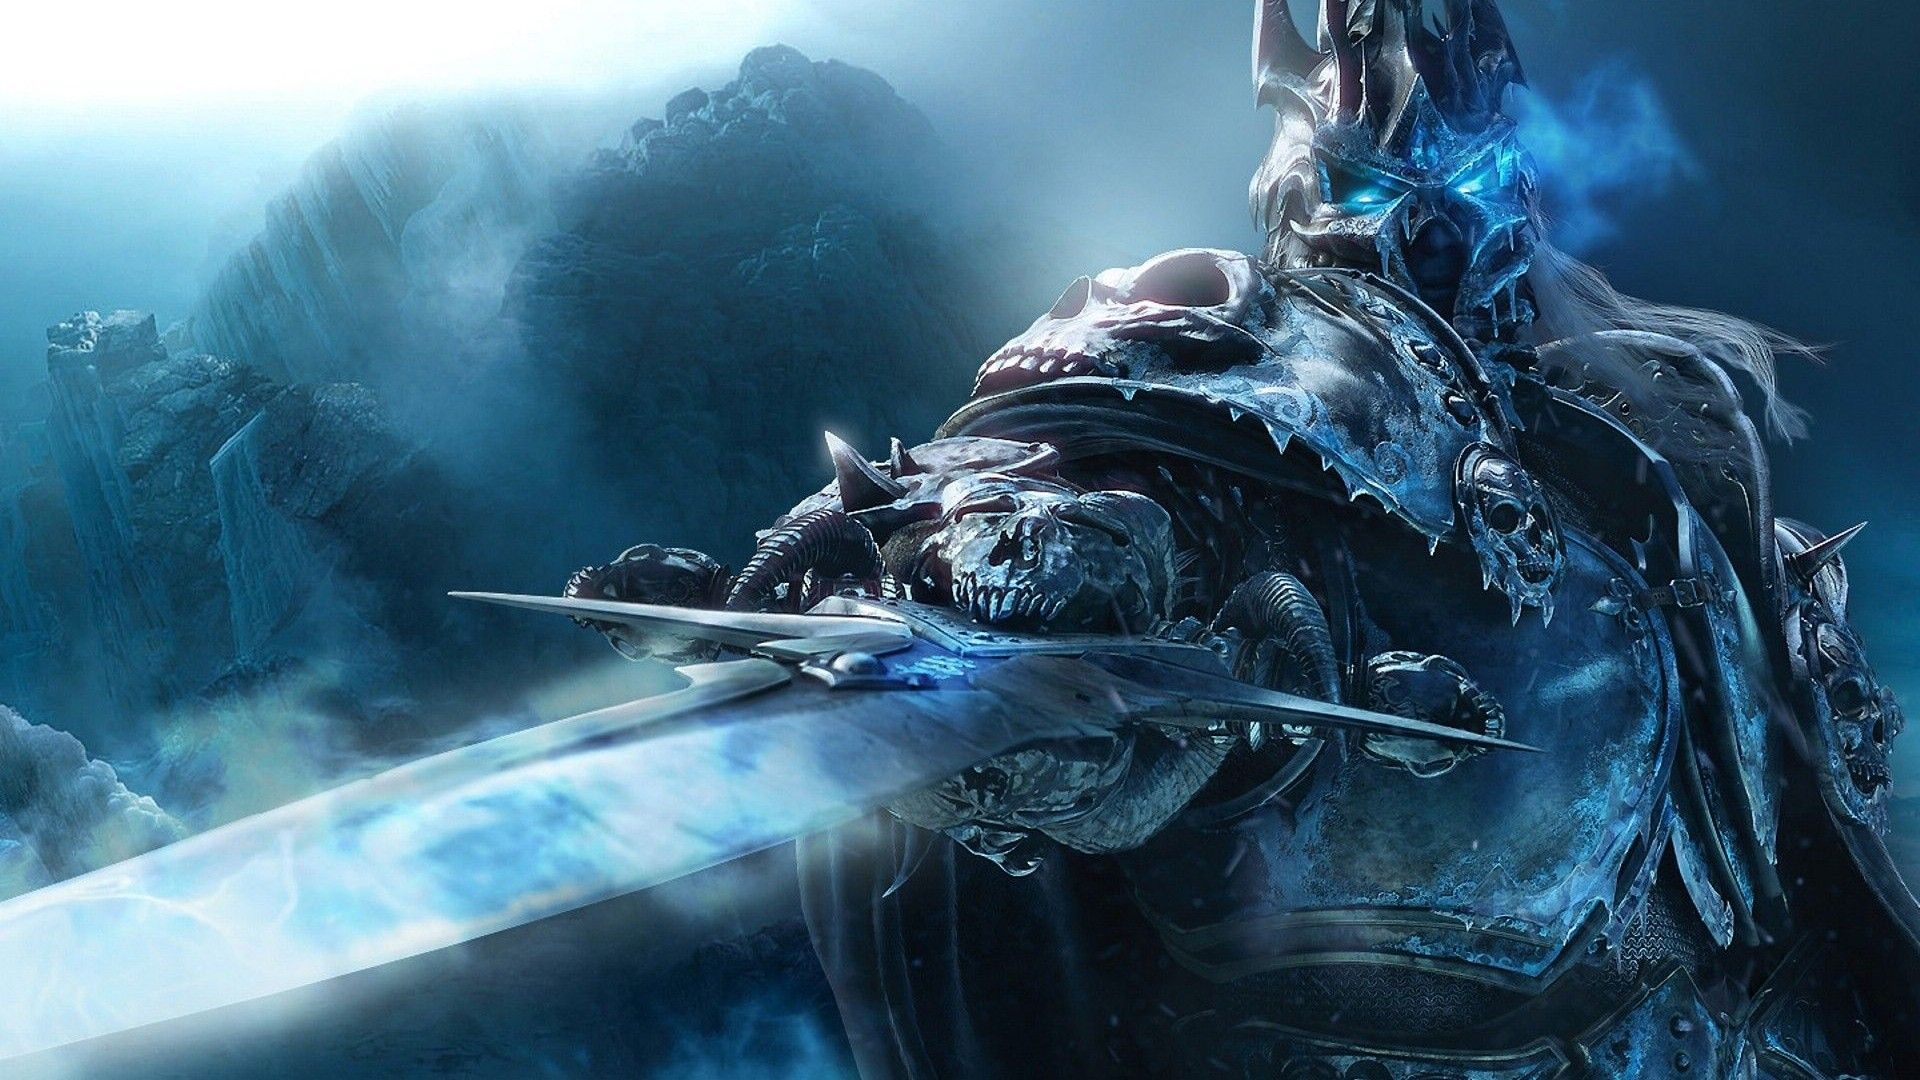 World of warcraft wrath of the lich king 2016 - Defense of The